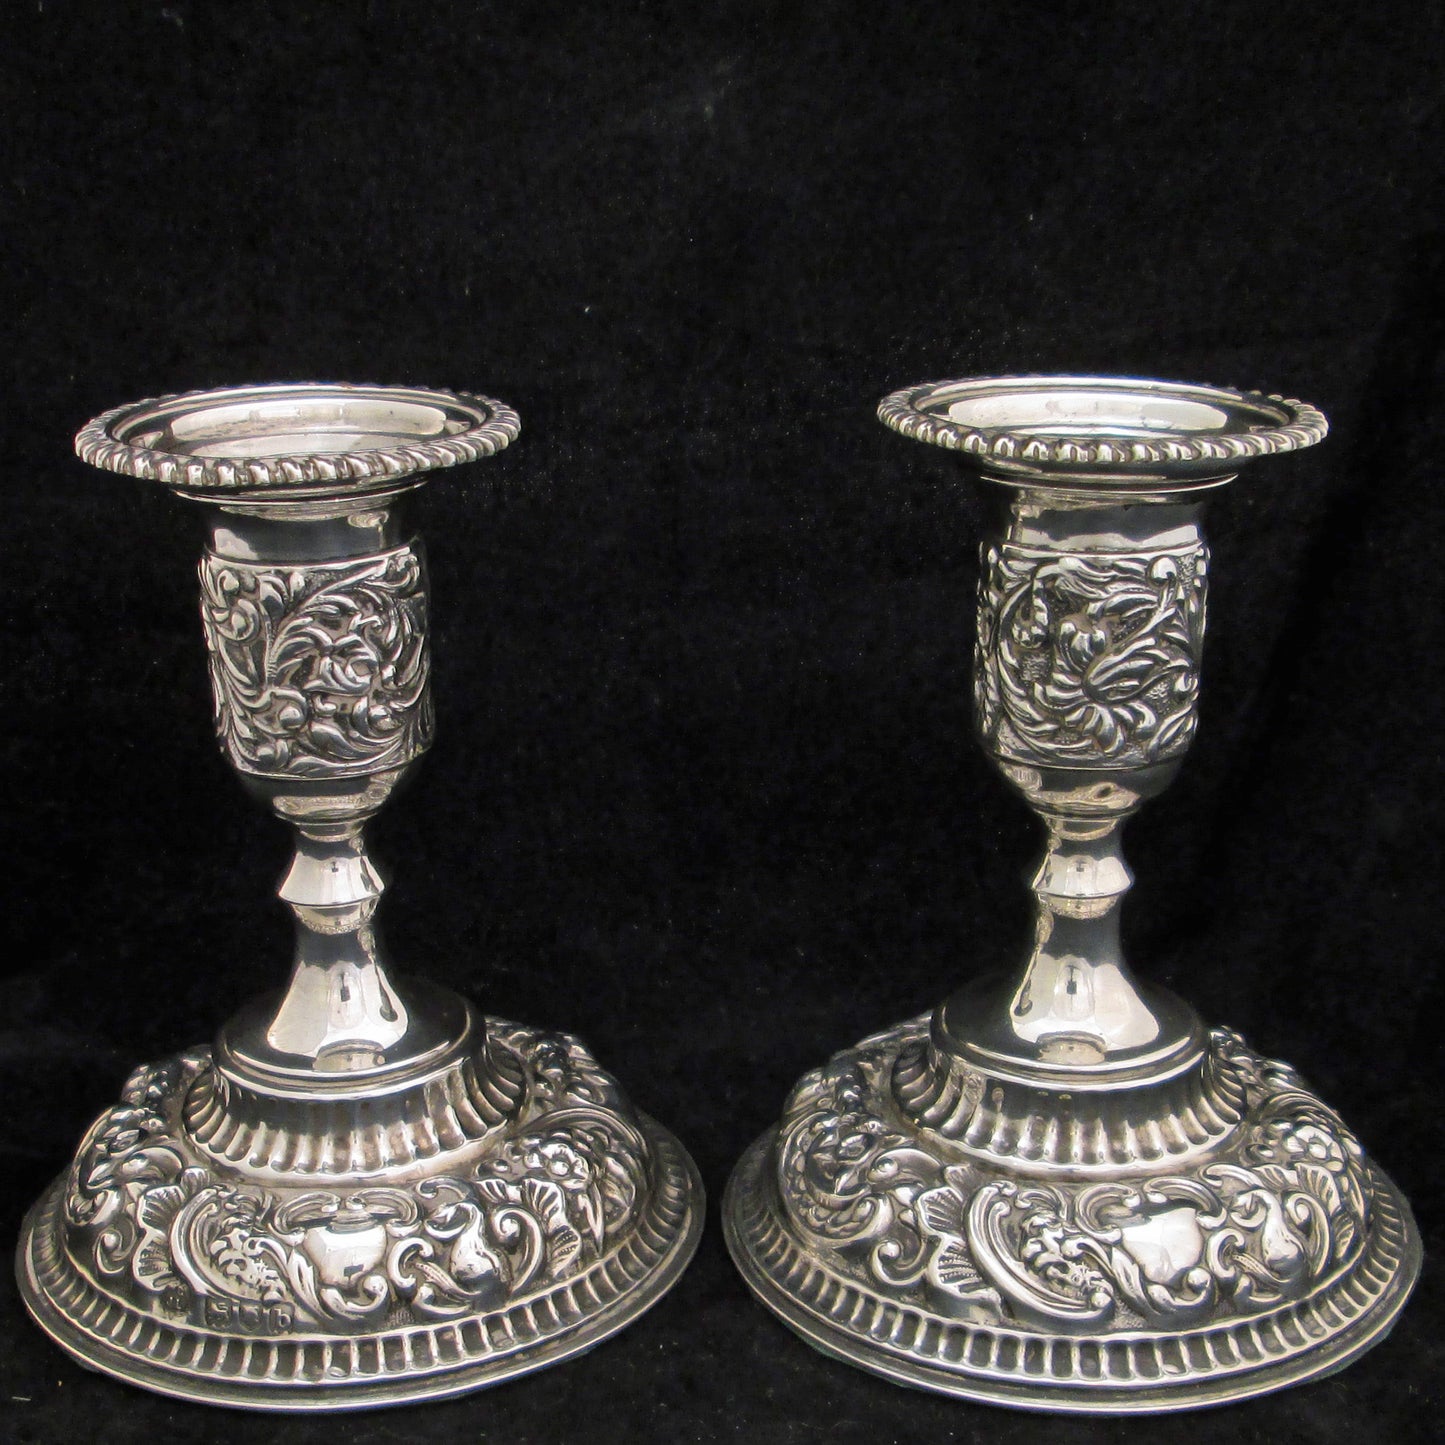 A pair of sterling silver embossed candlesticks.